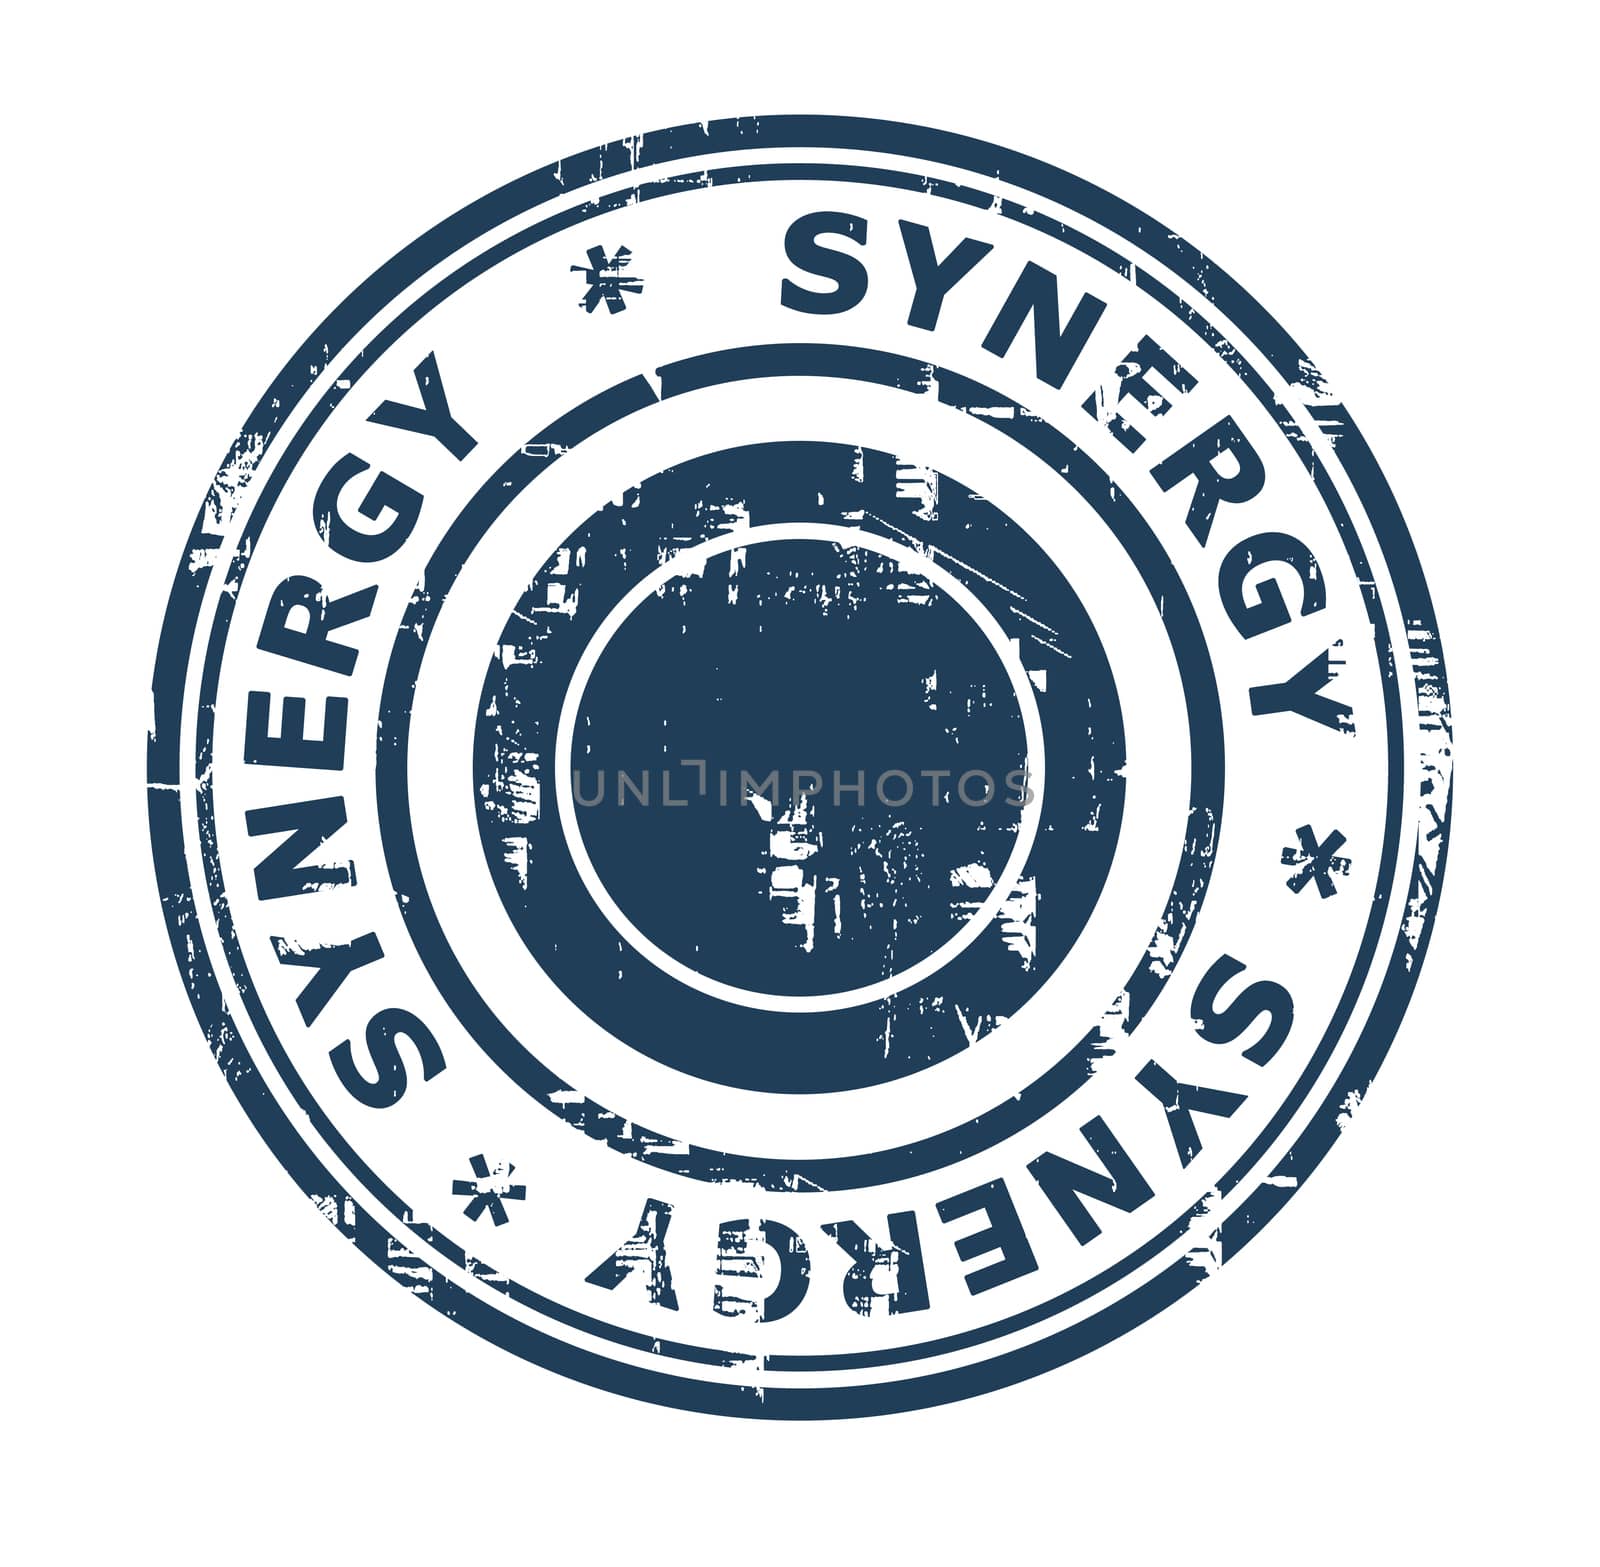 Business synergy concept stamp isolated on a white background.